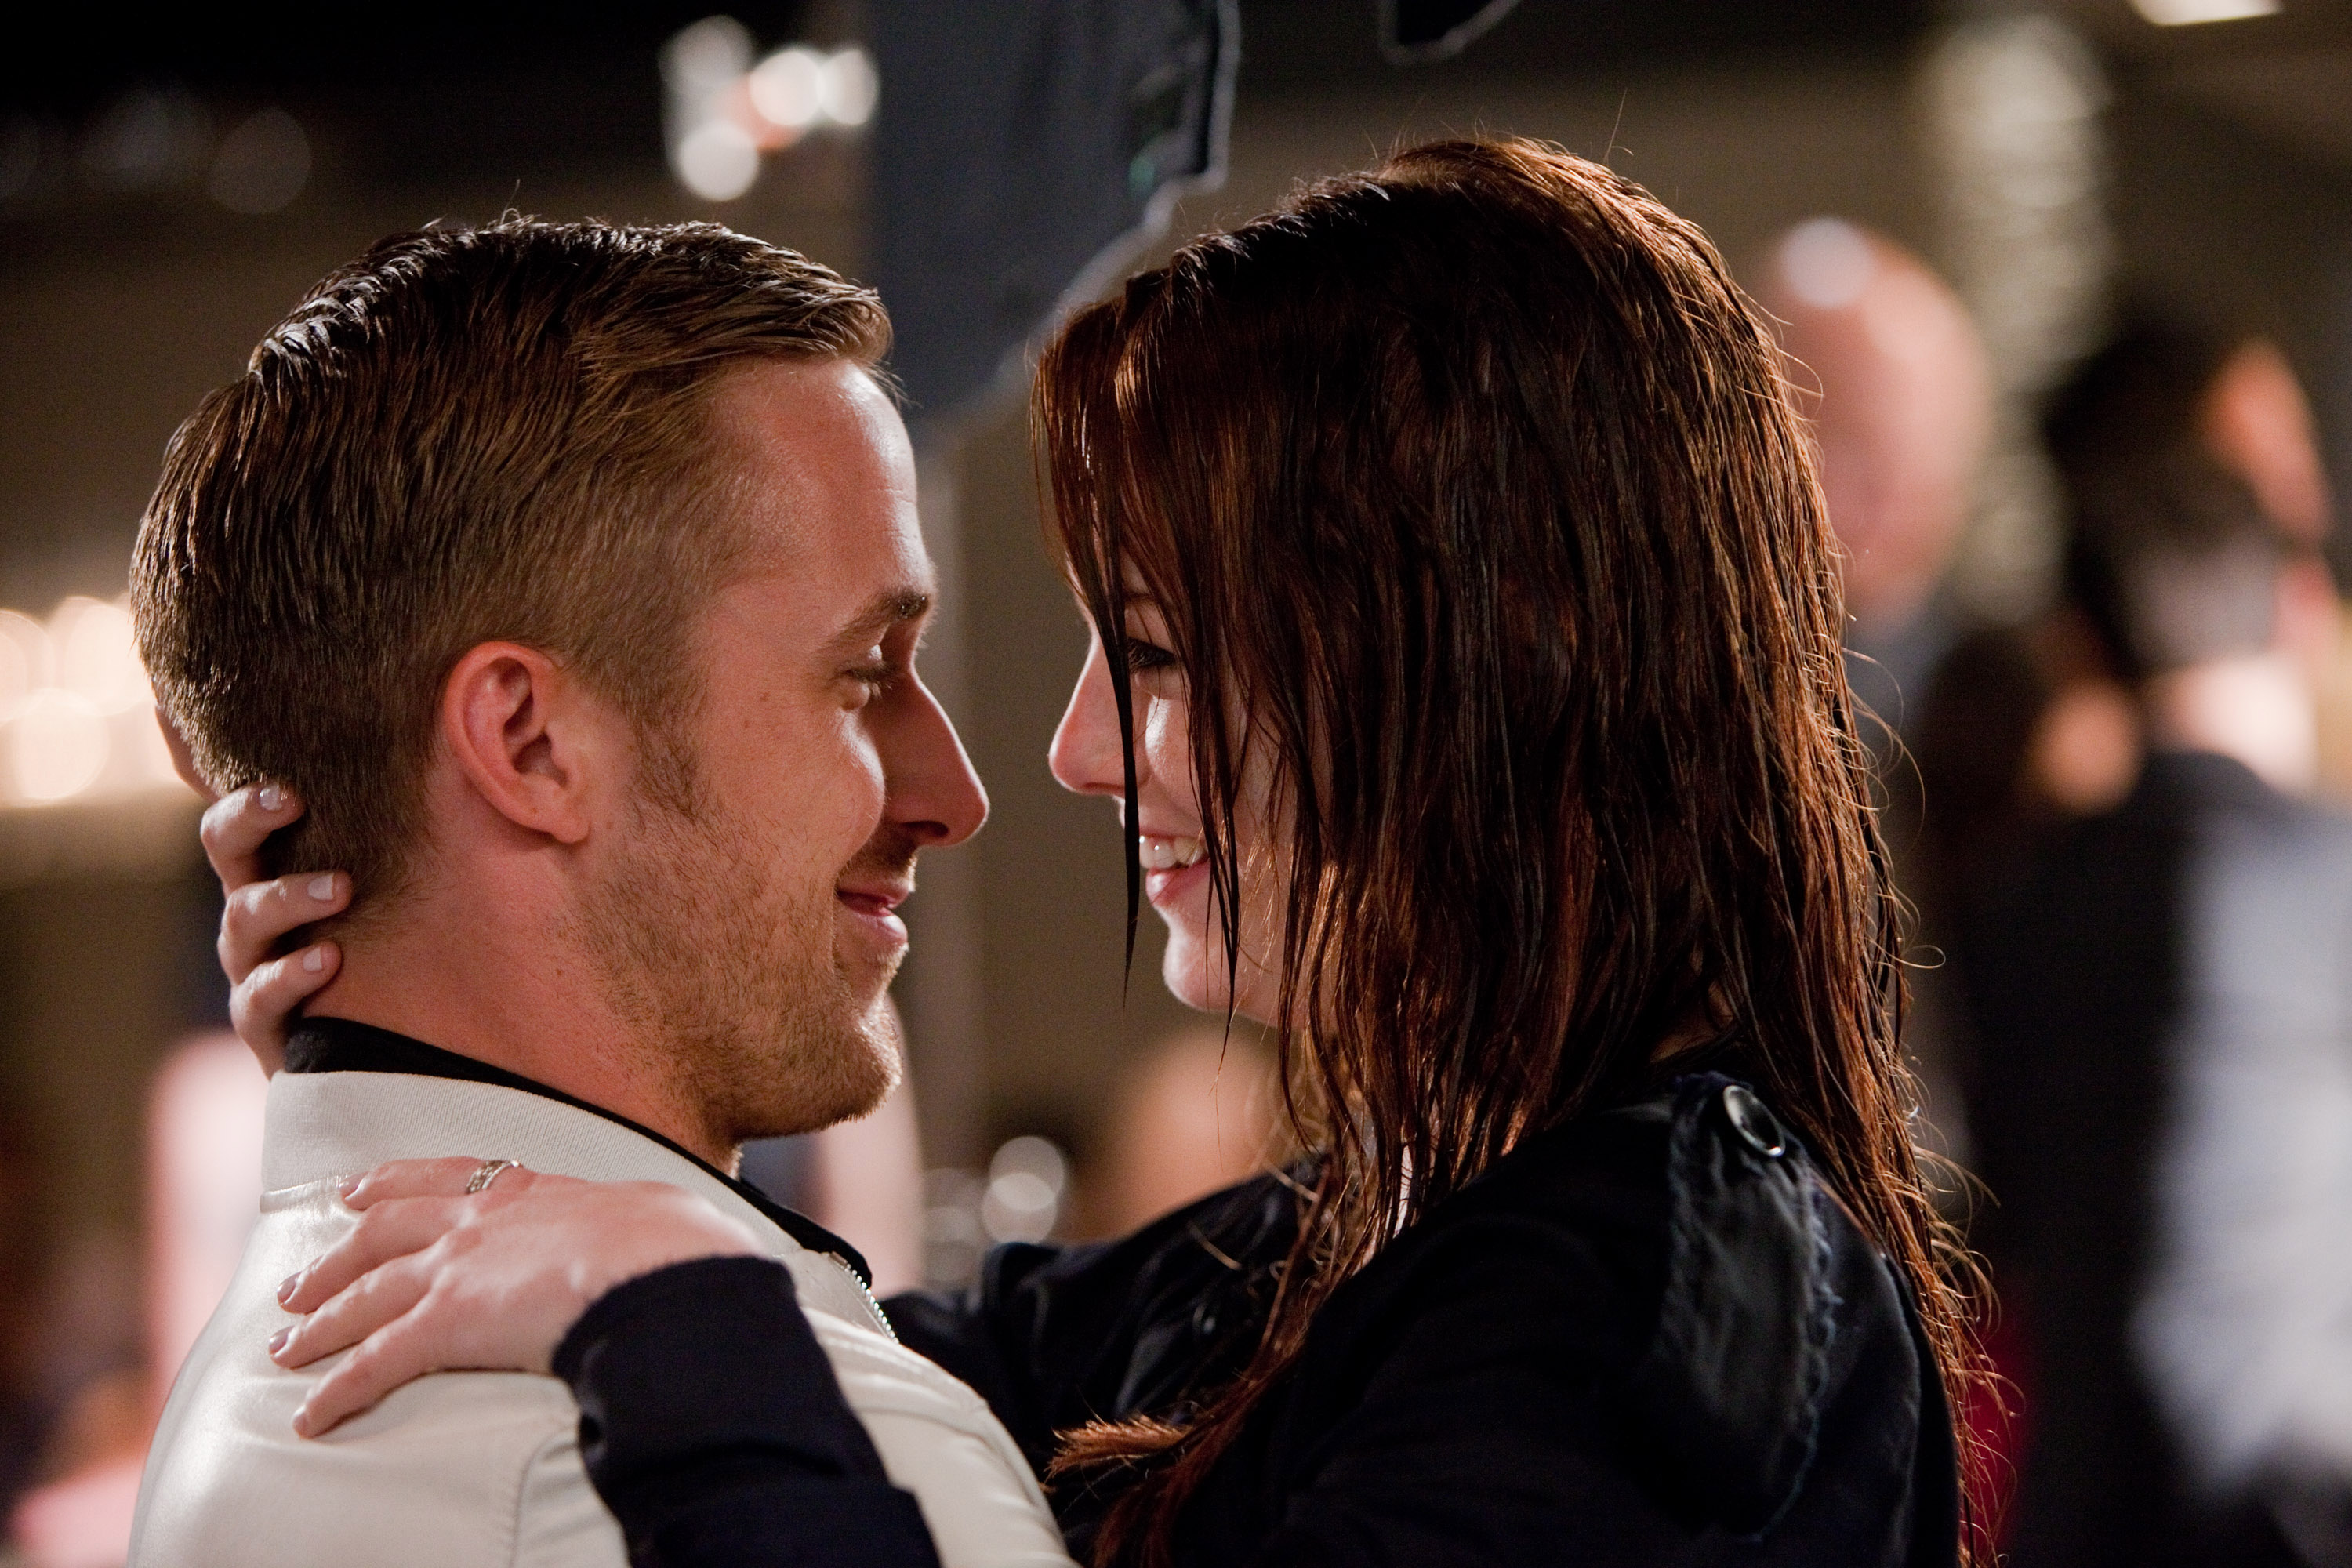 (L-r) RYAN GOSLING as Jacob and EMMA STONE as Hannah in Warner Bros. Pictures comedy CRAZY, STUPID, LOVE. a Warner Bros. Pictures release.